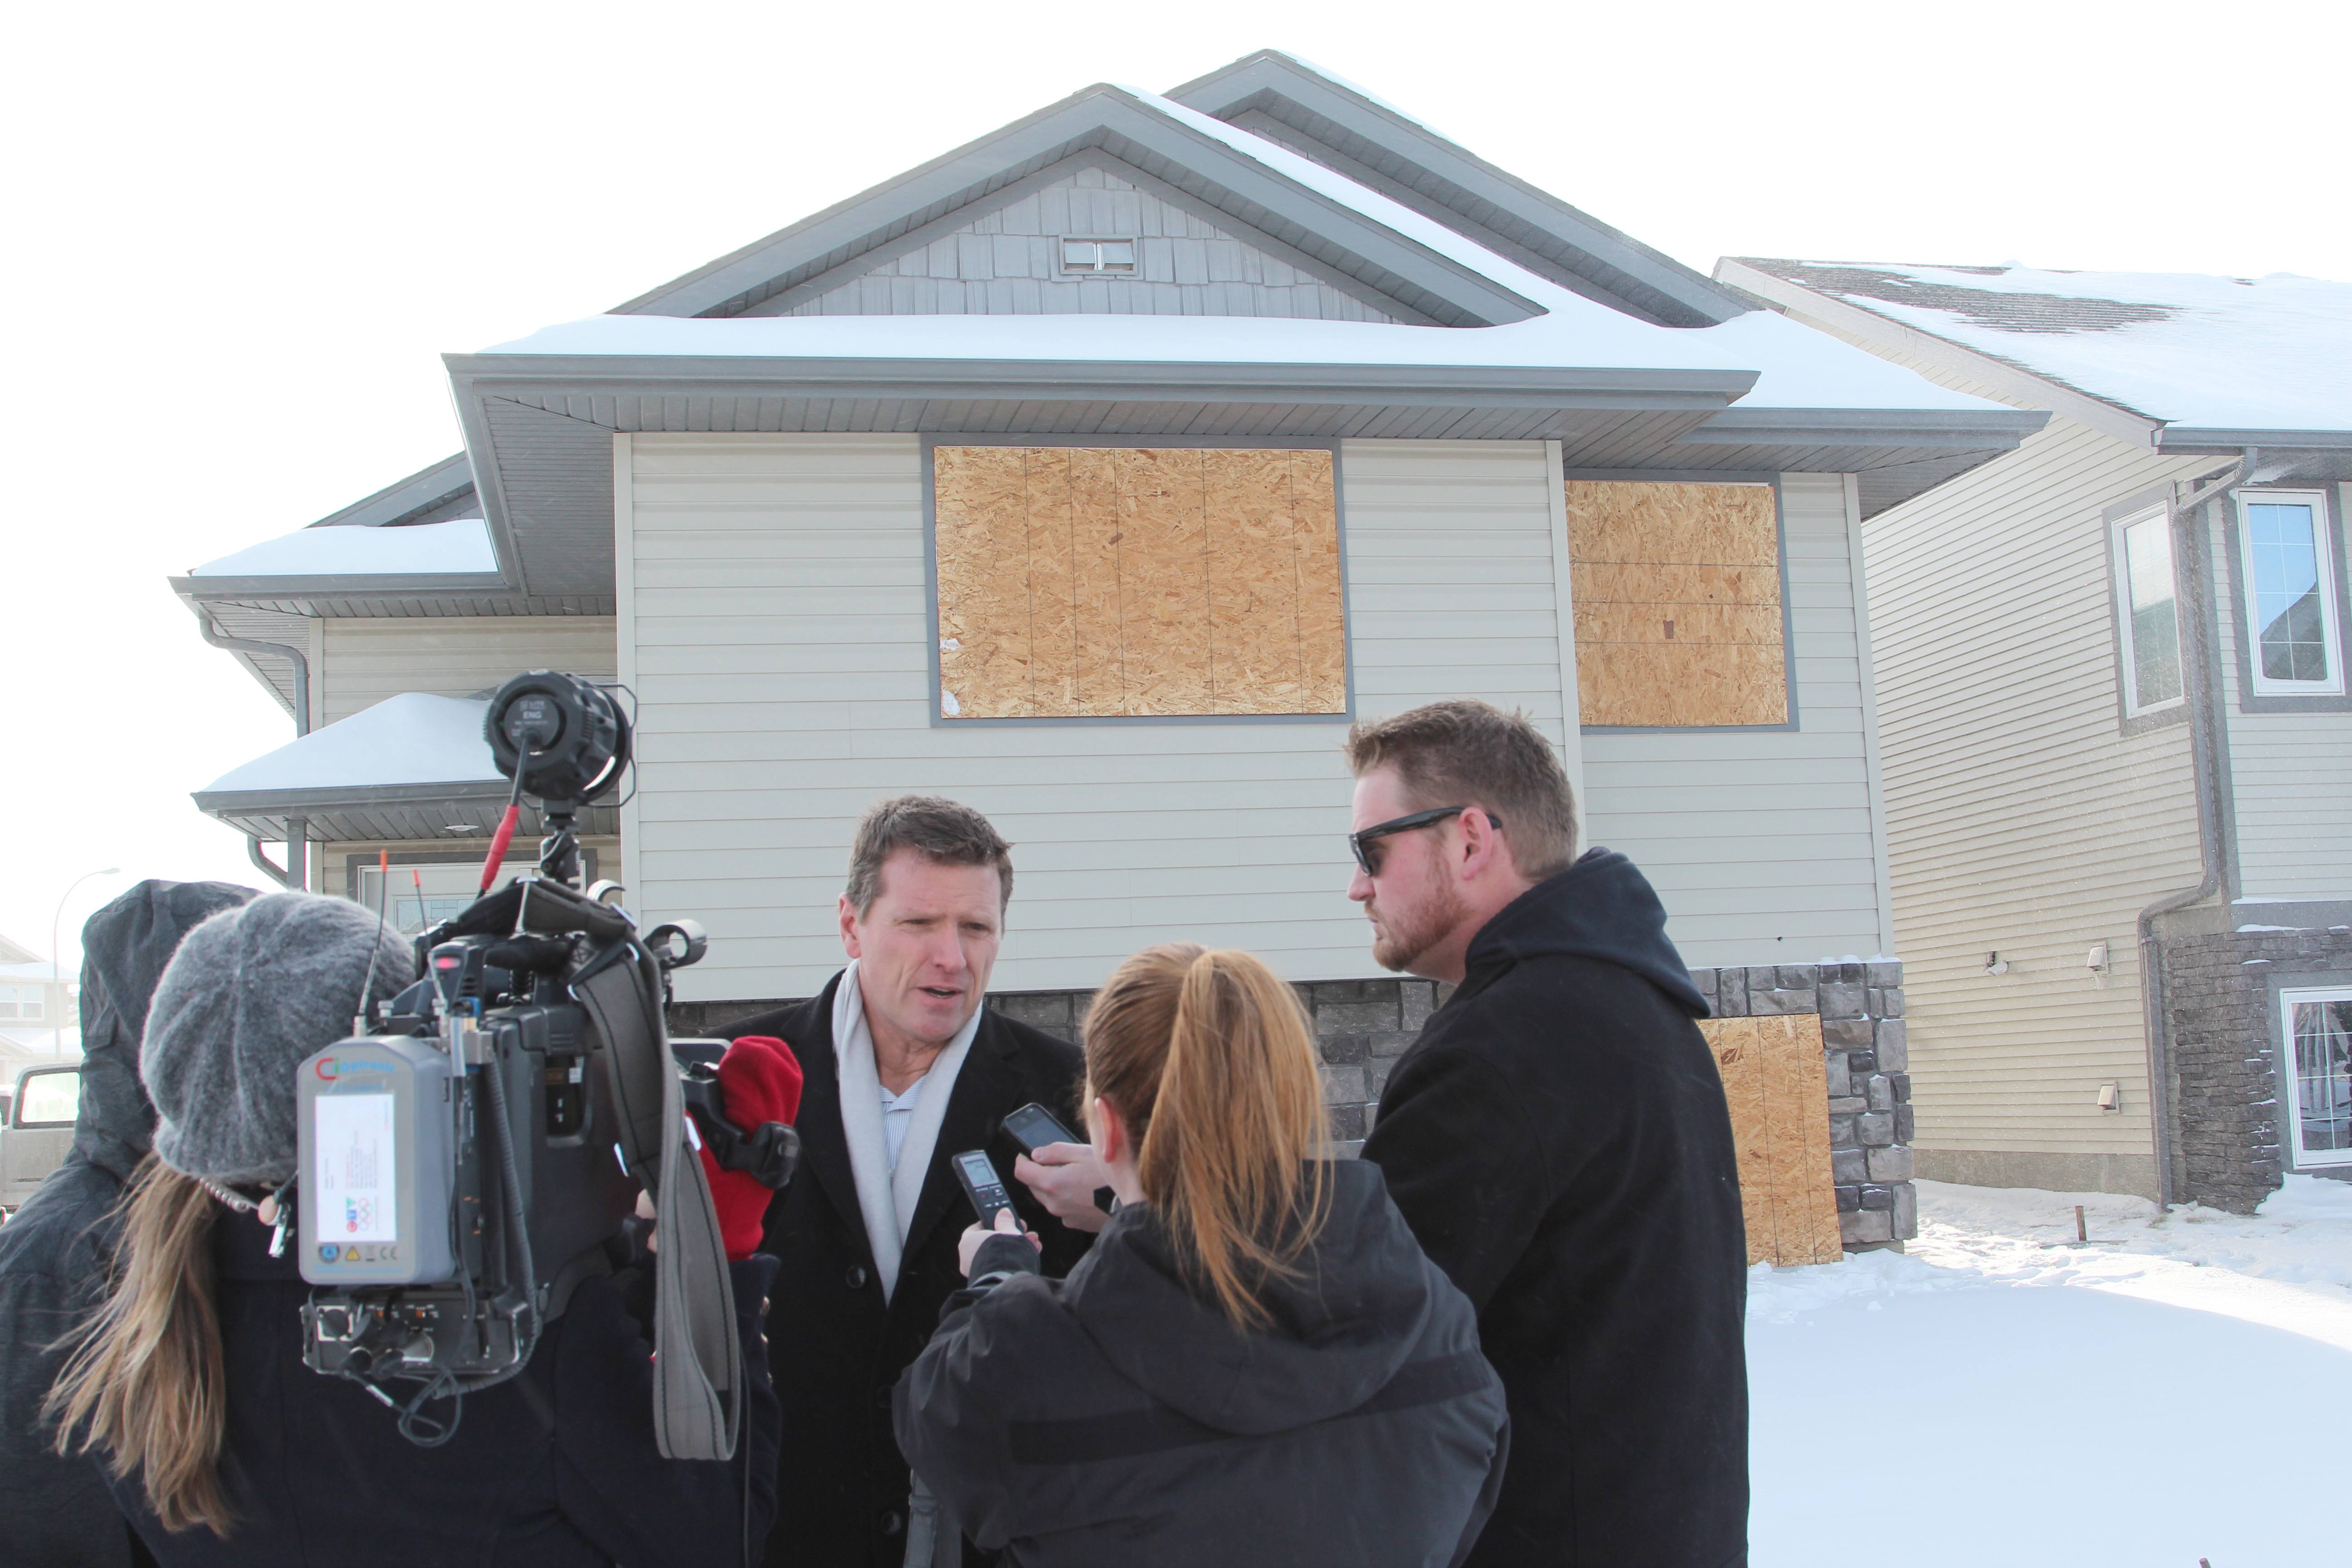 CLOSURE - Safer Communities and Neighbourhoods (SCAN) Unit Manager Billy Kerr talks to media outside a home in Inglewood that was boarded up yesterday. A Community Safety Order was placed for the home after numerous complaints of suspicious activity by neighbours were received.